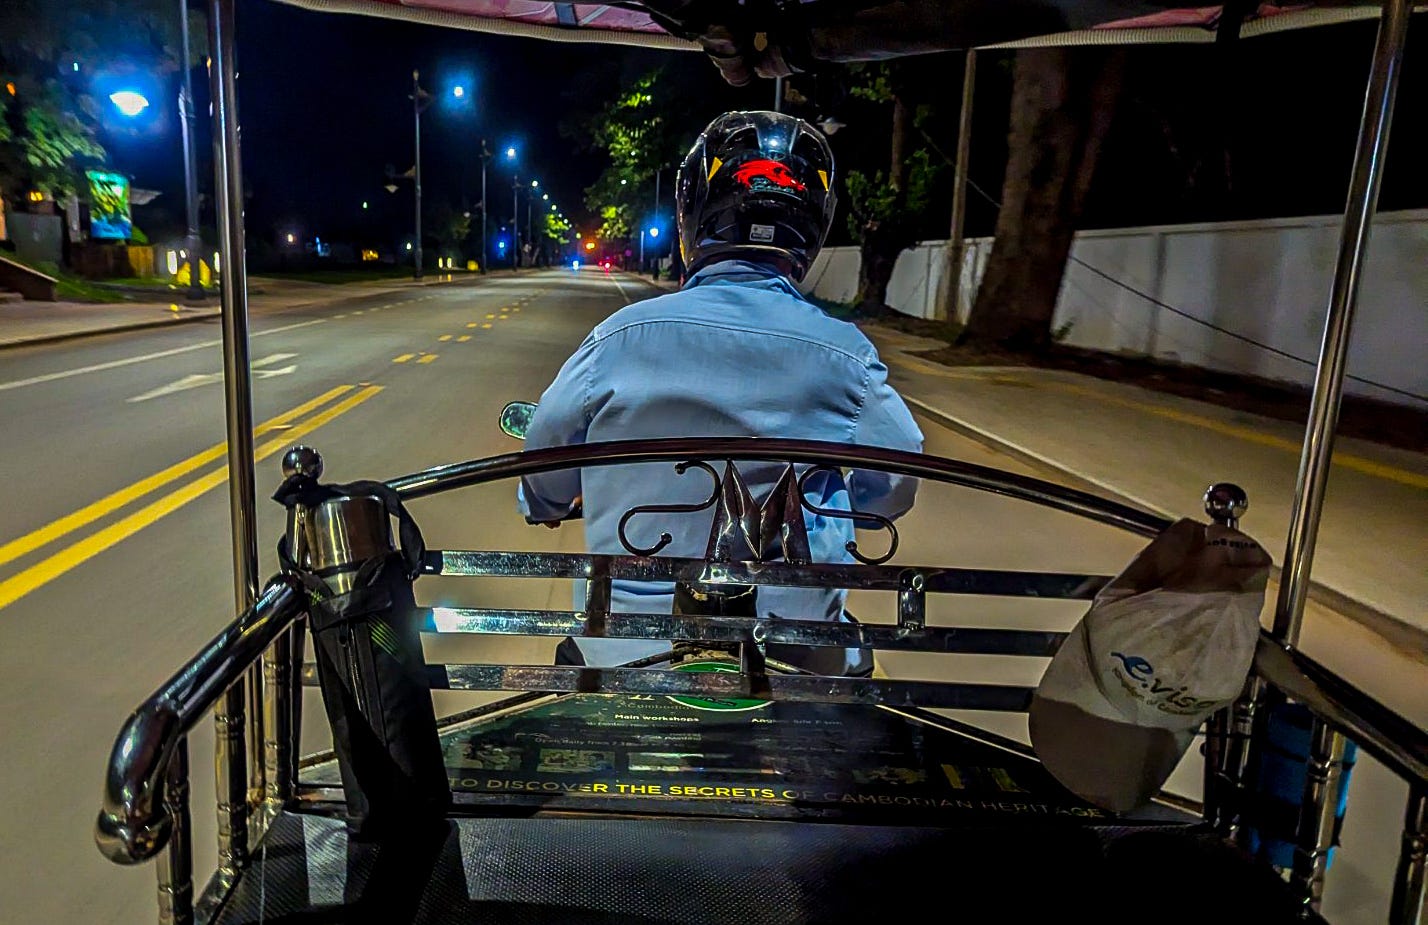 A view or Mr. Chhun from the backseat of our tuk tuk.